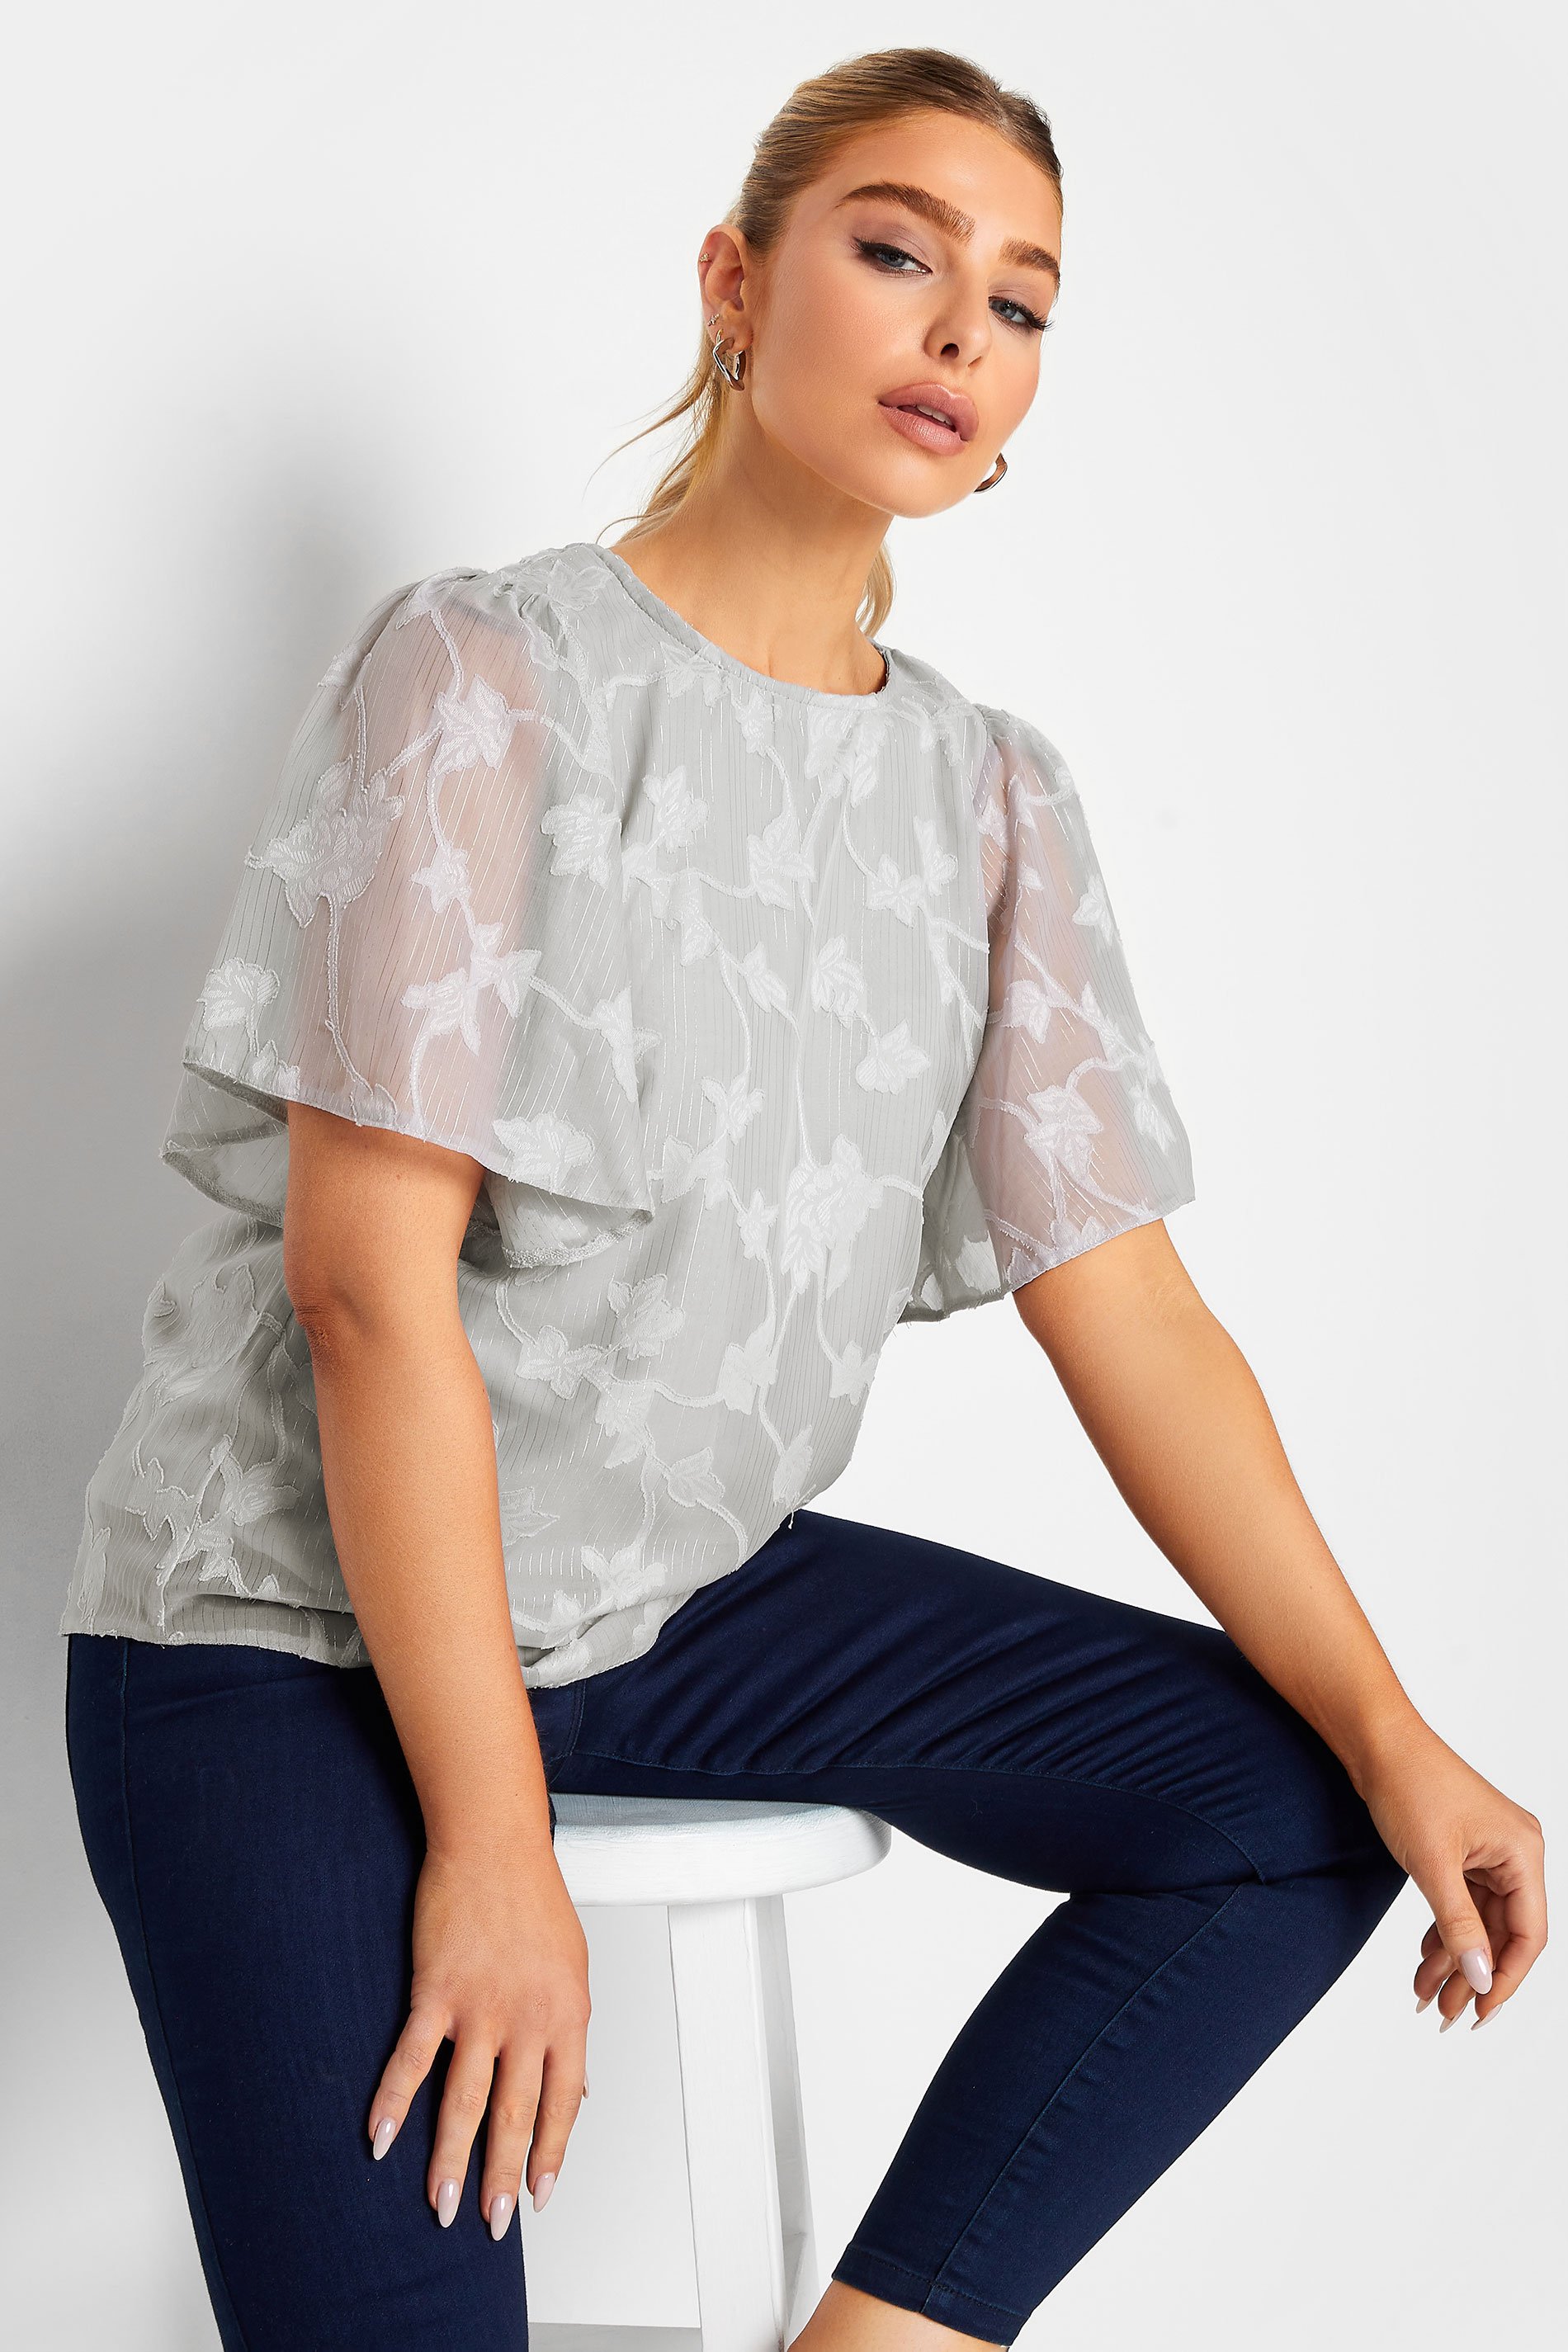 M&Co Grey Floral Shimmer Angel Sleeve Blouse | M&Co 1